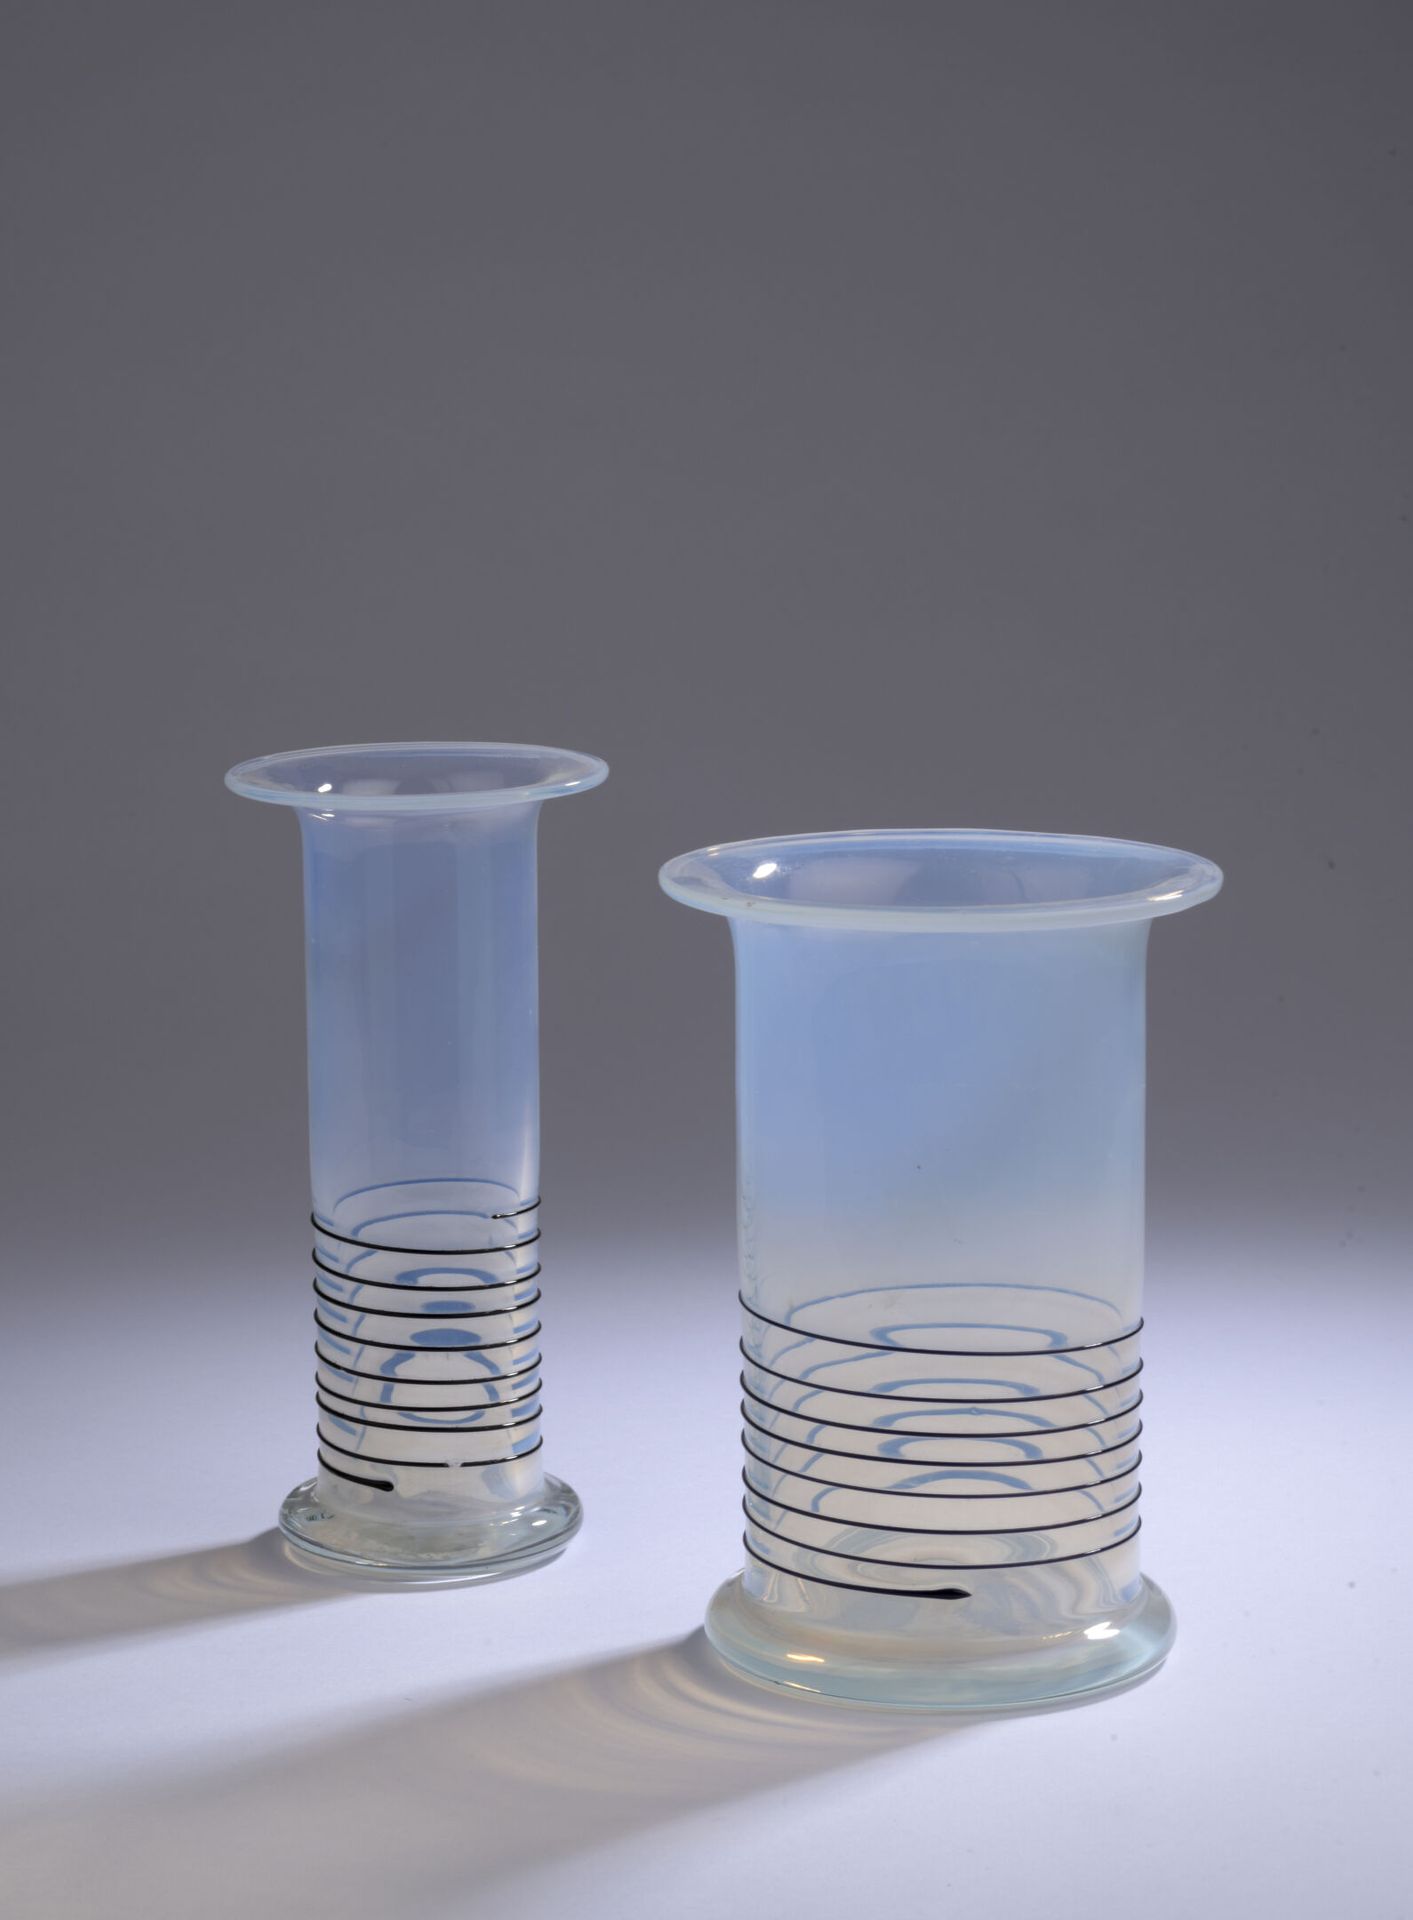 Null Italian work of the 1990s.

Series of two vases in glass very slightly opal&hellip;